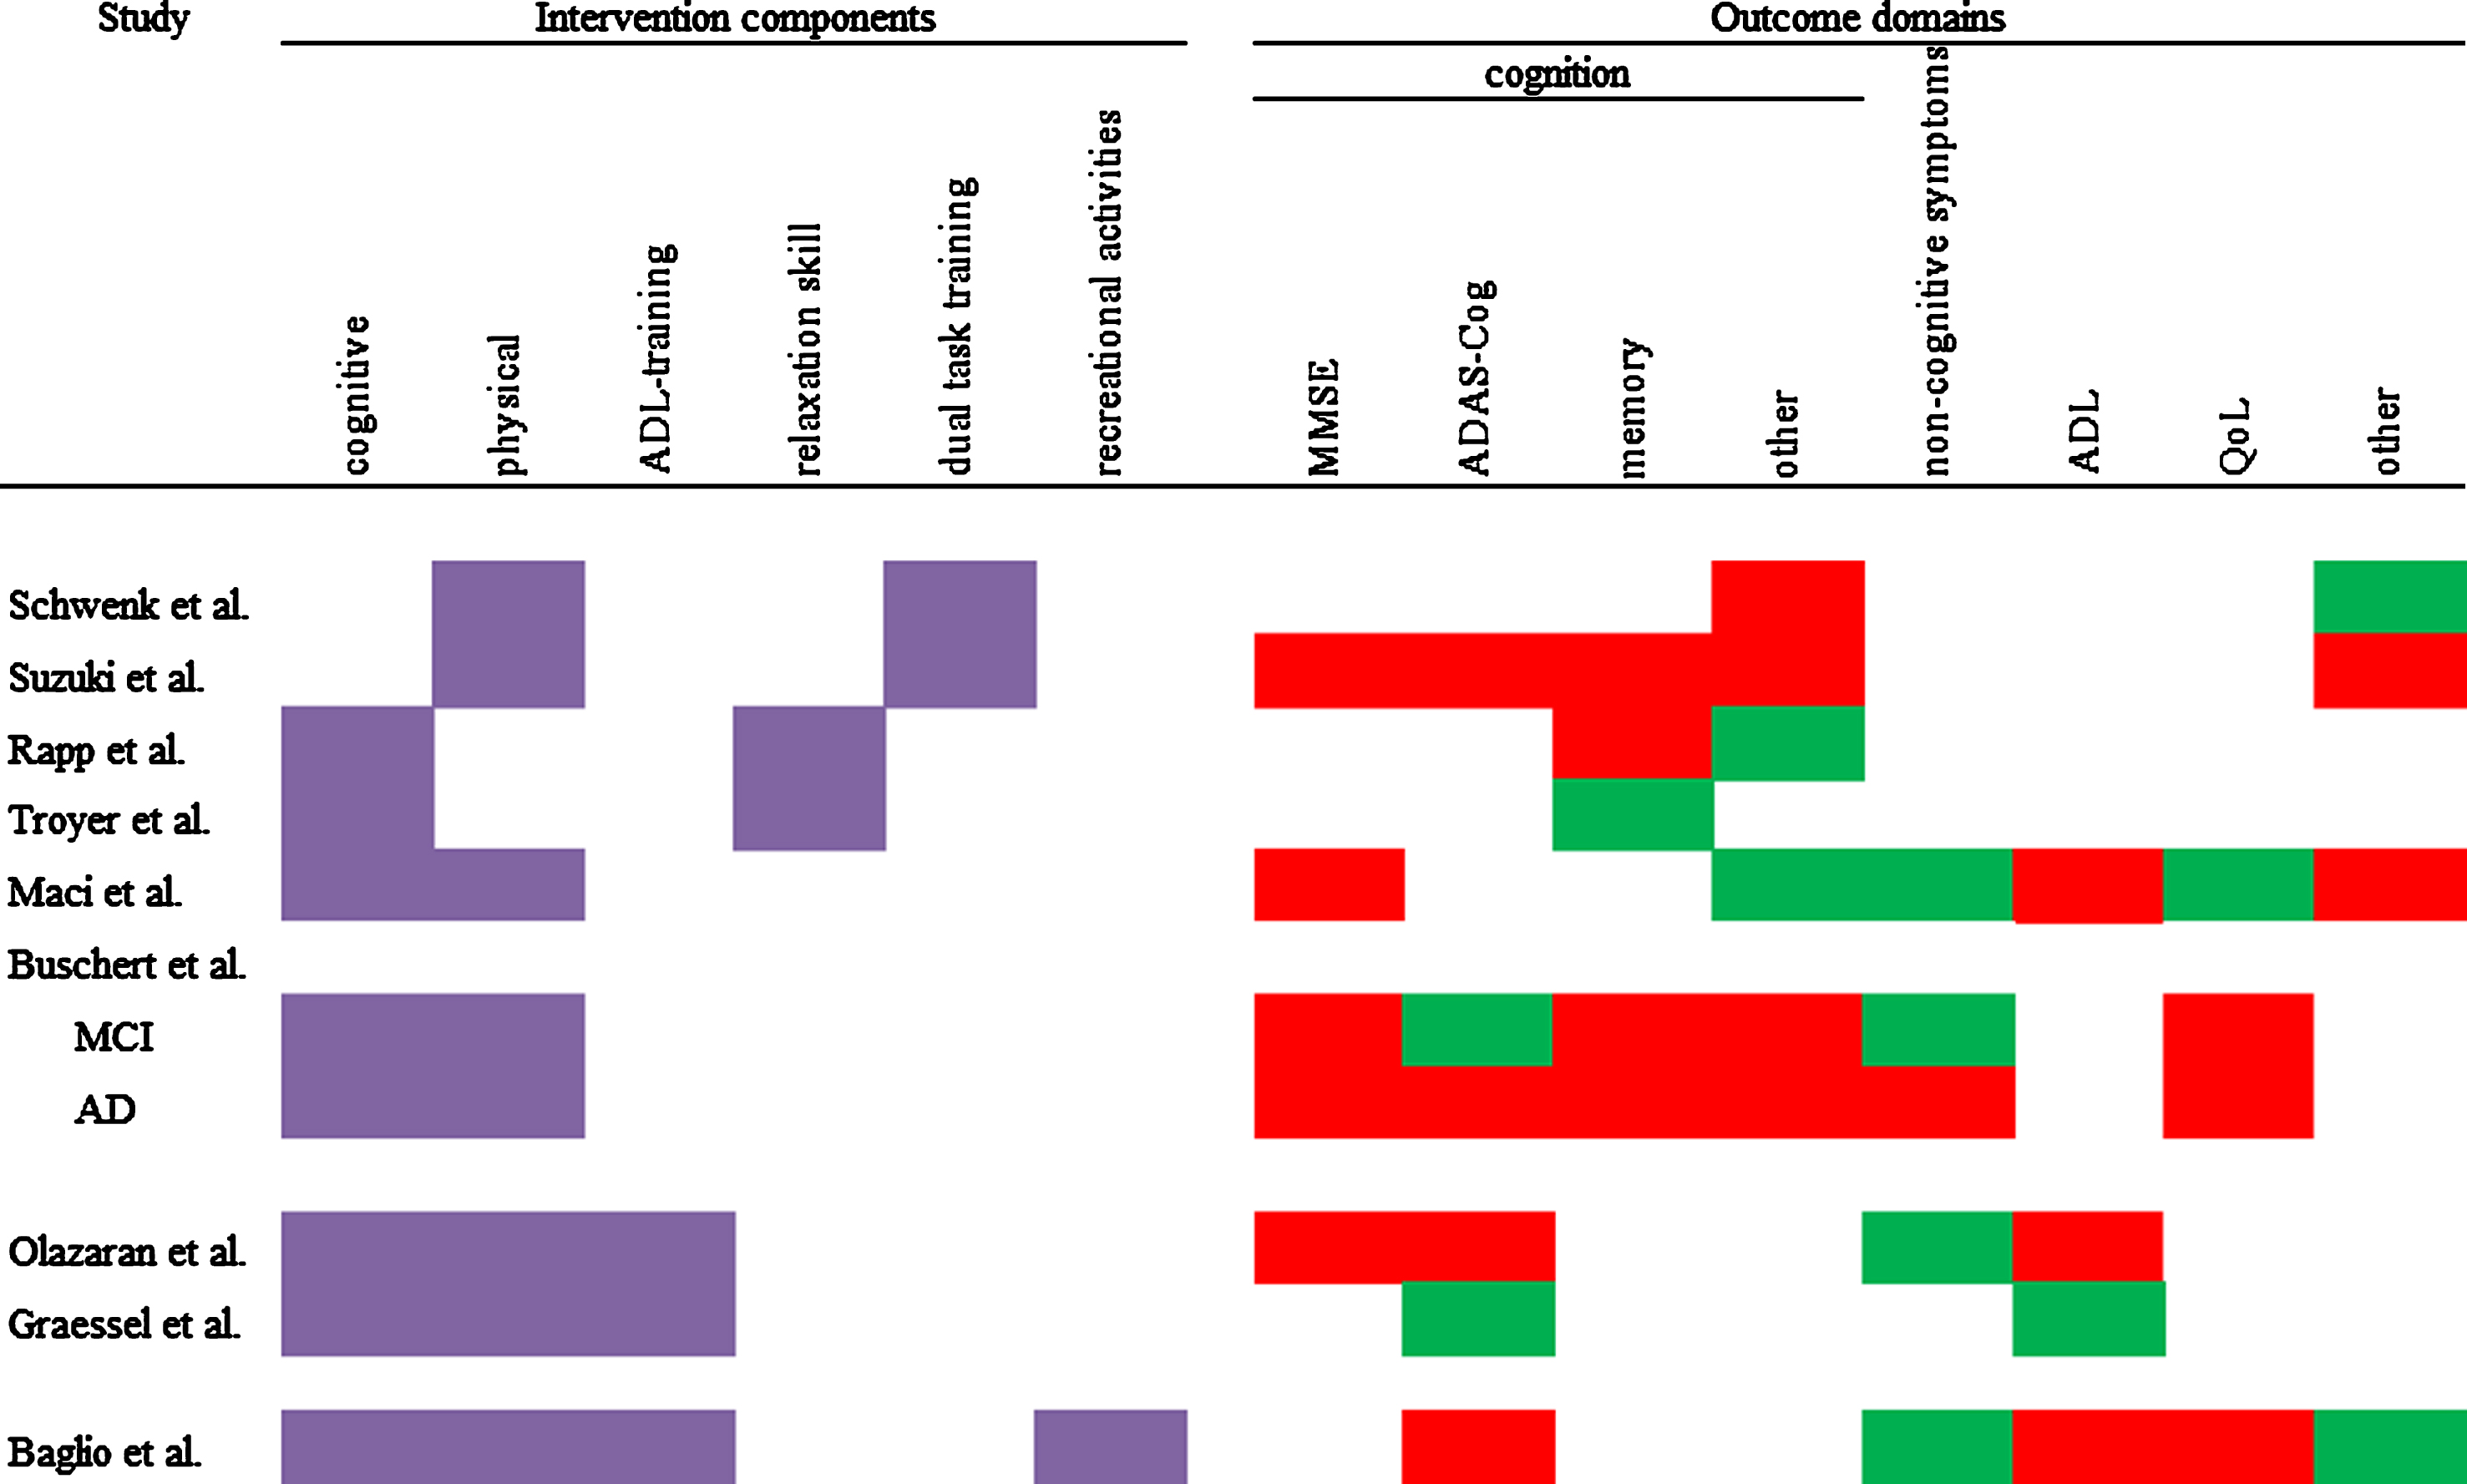 Overview of used components and intervention effects on different outcome domains. Purple = component used; red = IG has the same or worse values than CG; green = at least one measure in this domain shows an advantage for the IG.